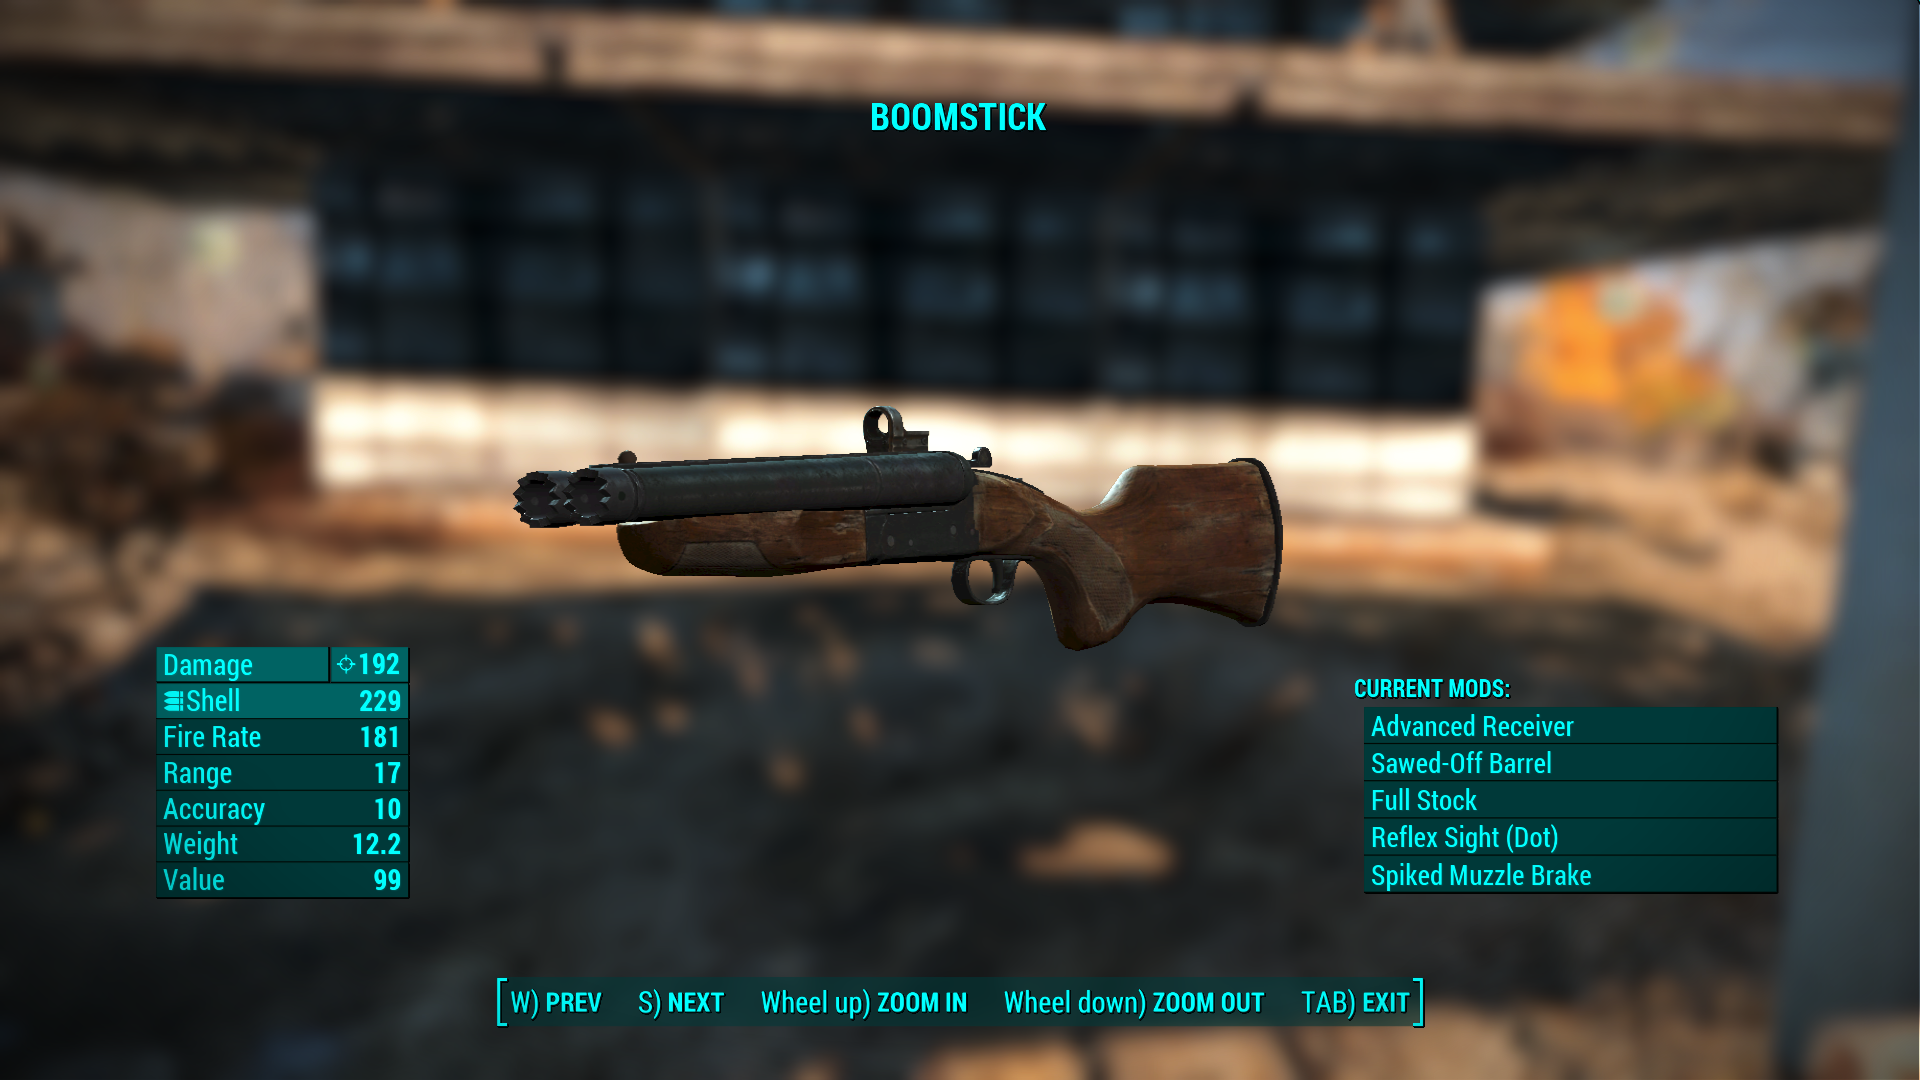 fallout 4 weapon pack mod